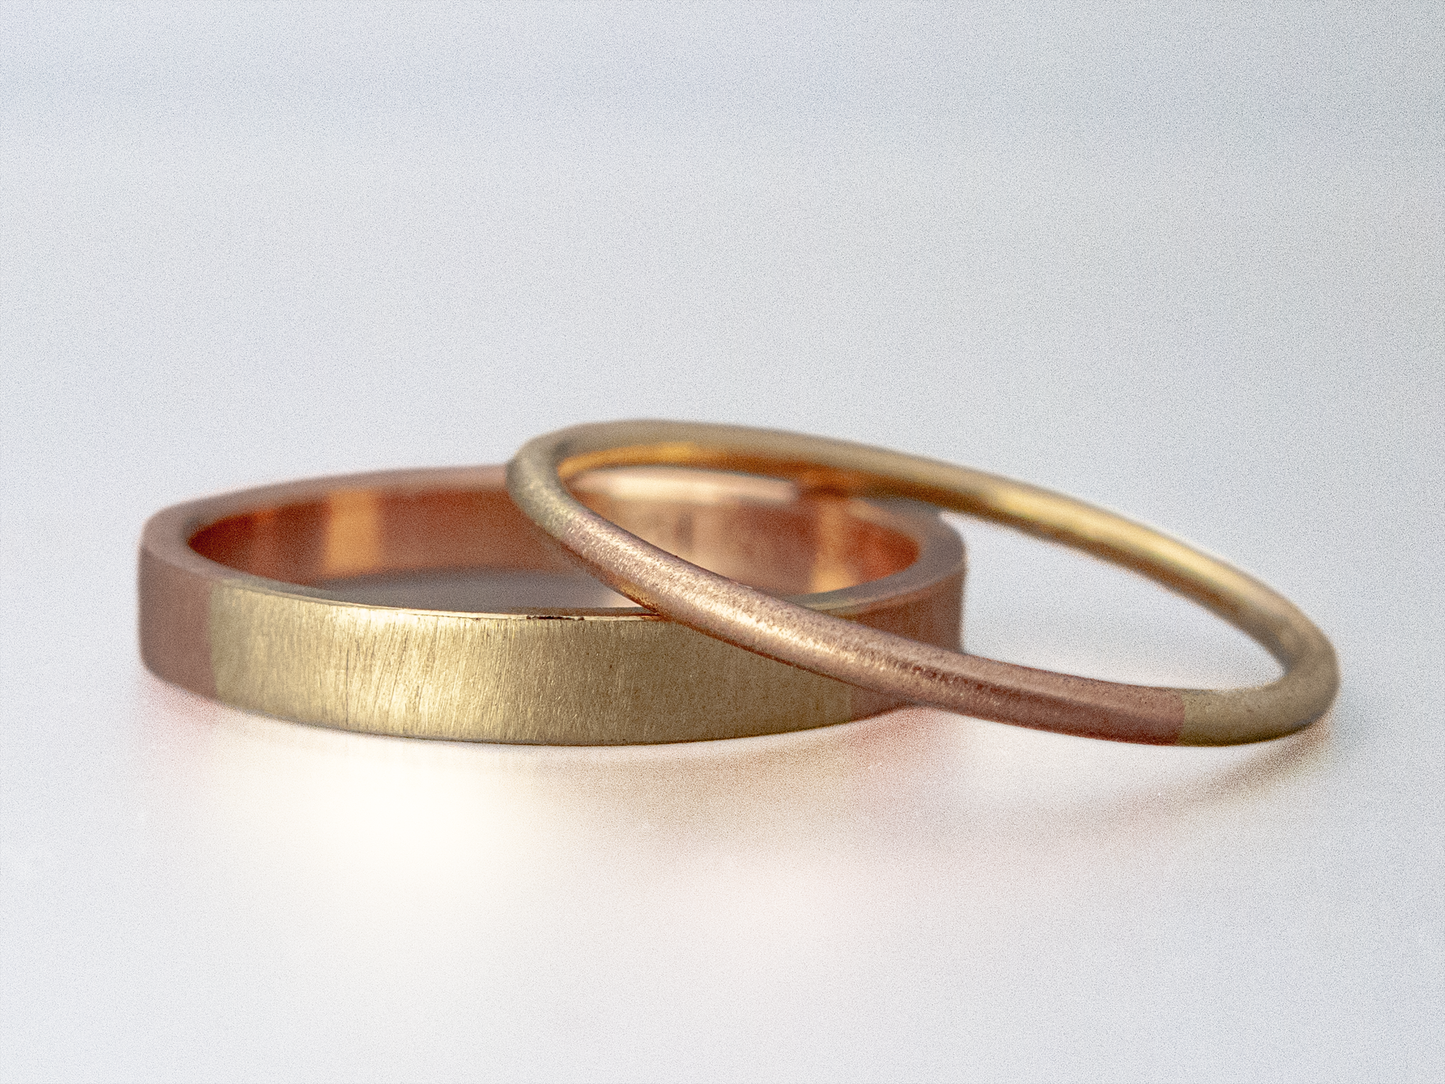 Wide Flat Two Tone Gold Wedding Ring - Opposites Attract Band 75/25  mix of 14k White, Yellow or Rose Gold, 3mm-6mm width